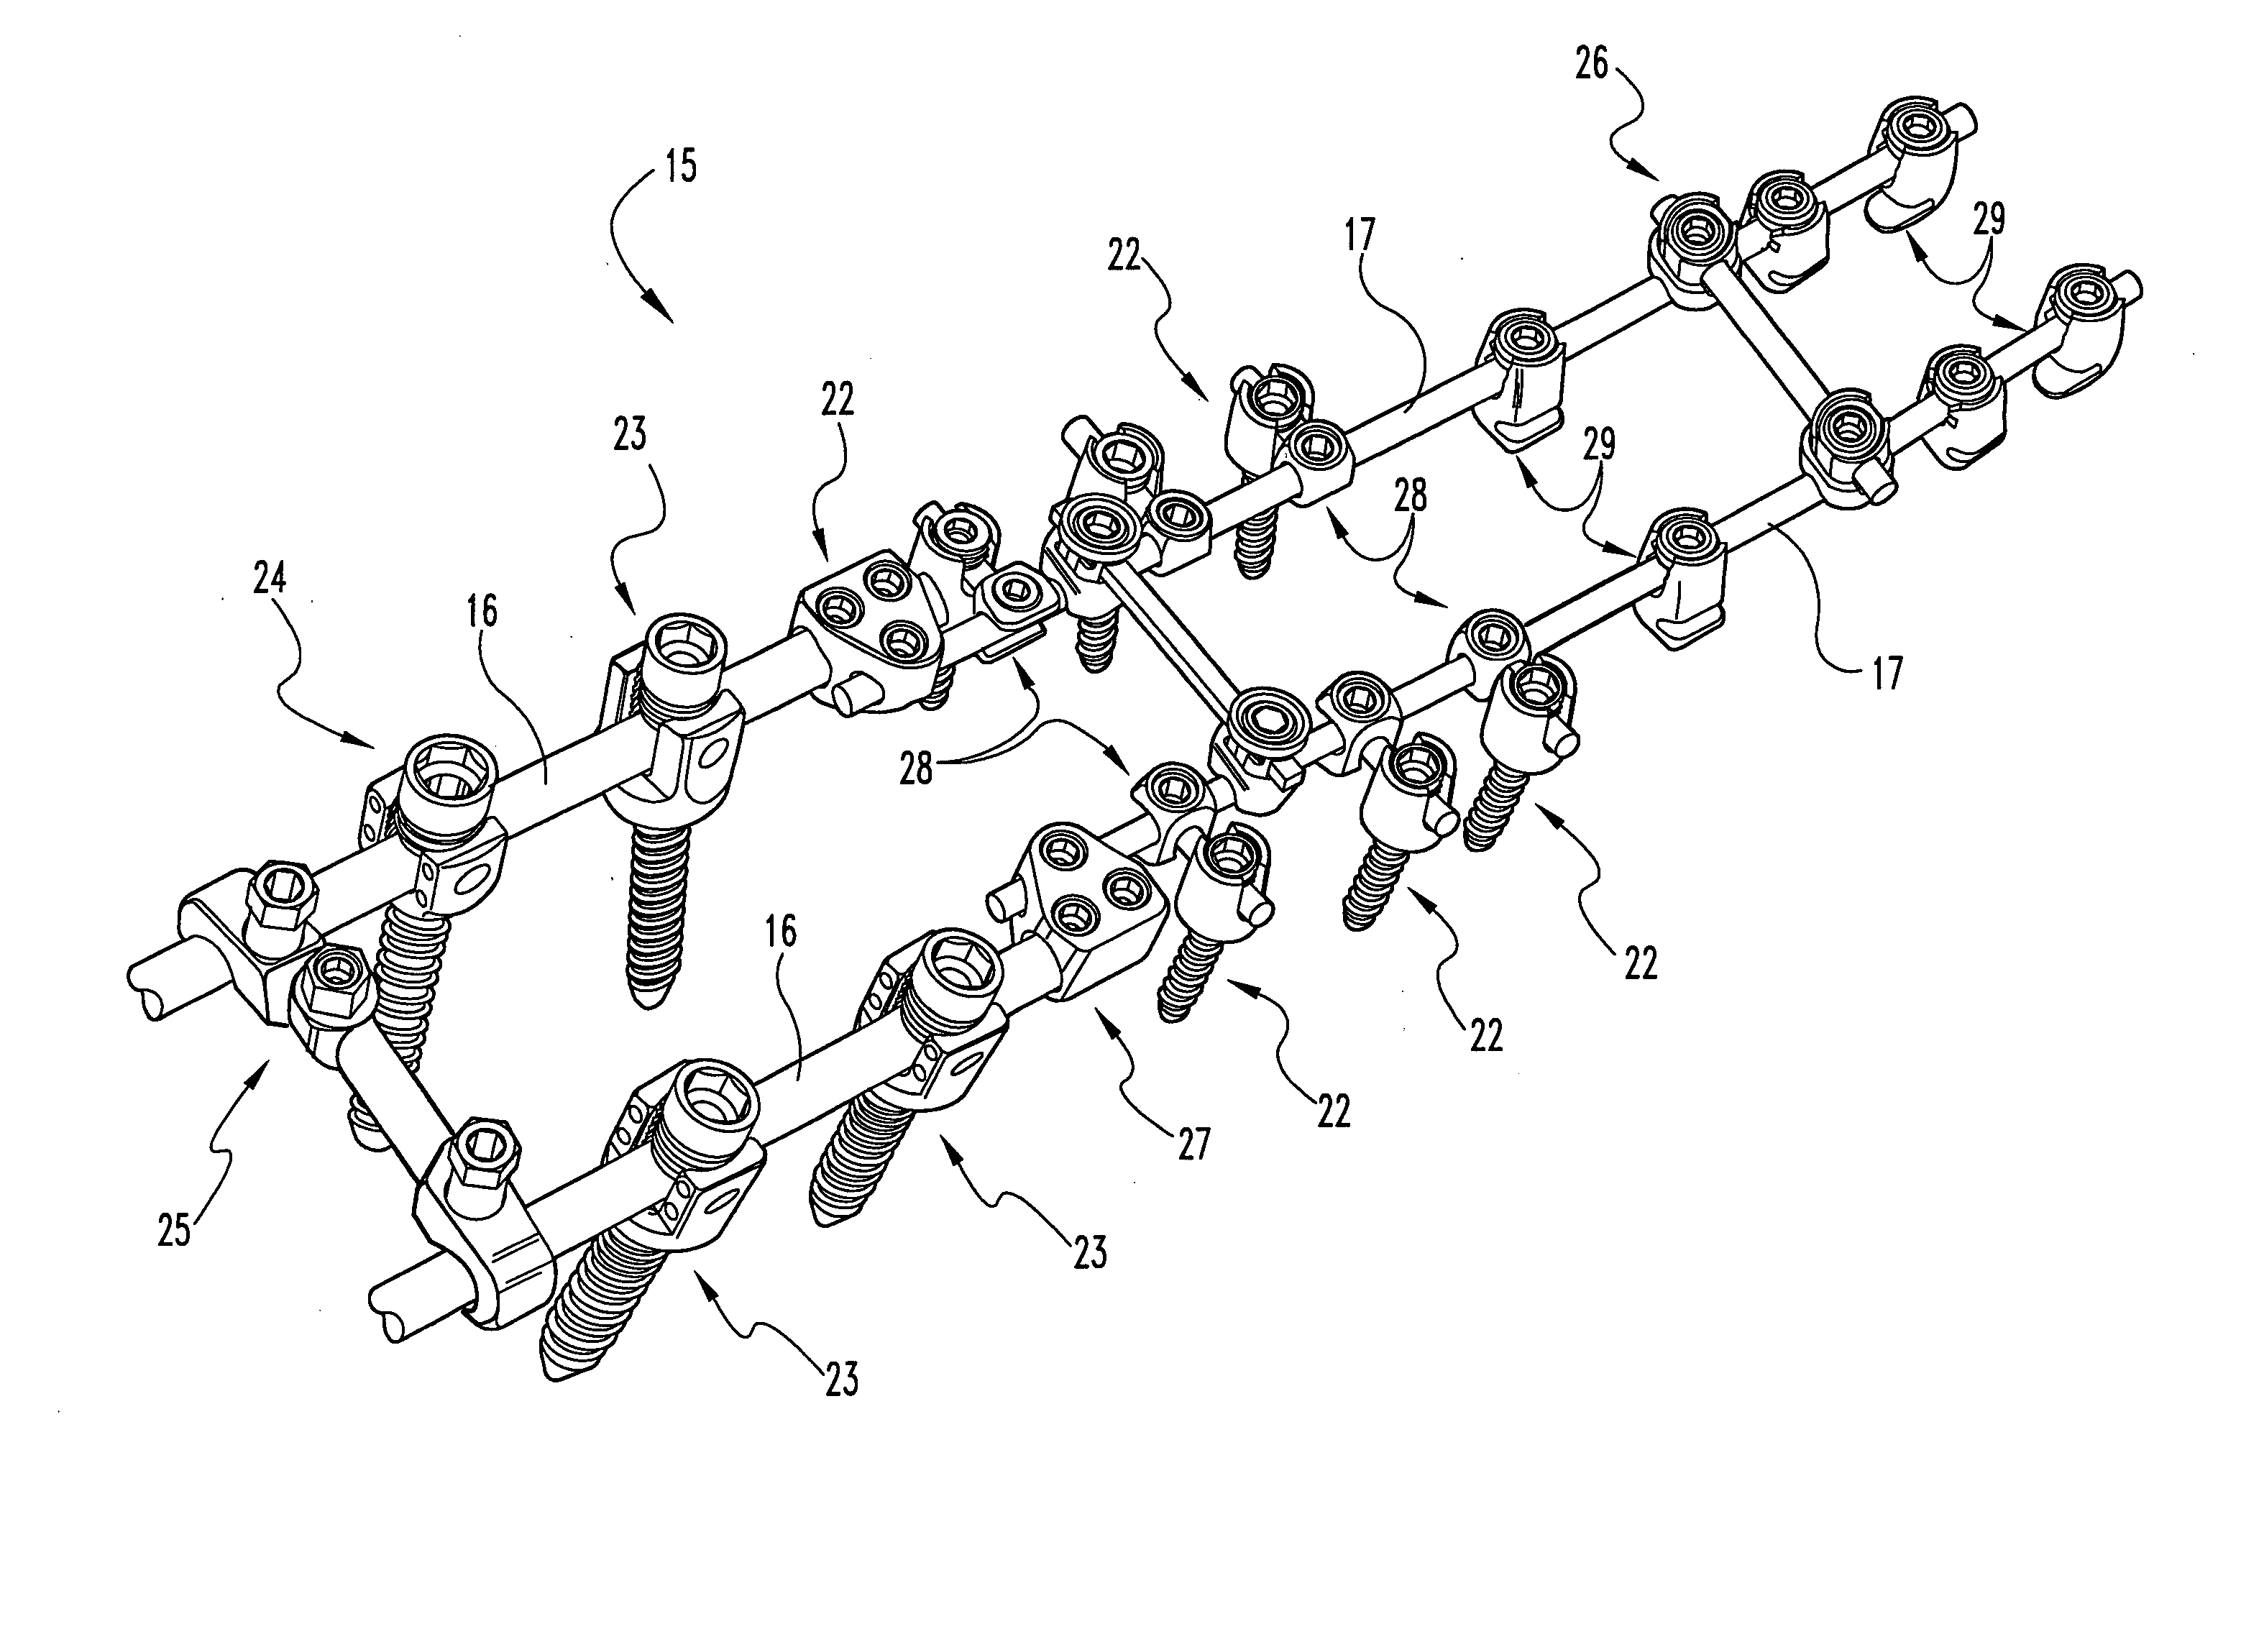 Multi-axial orthopedic device and system